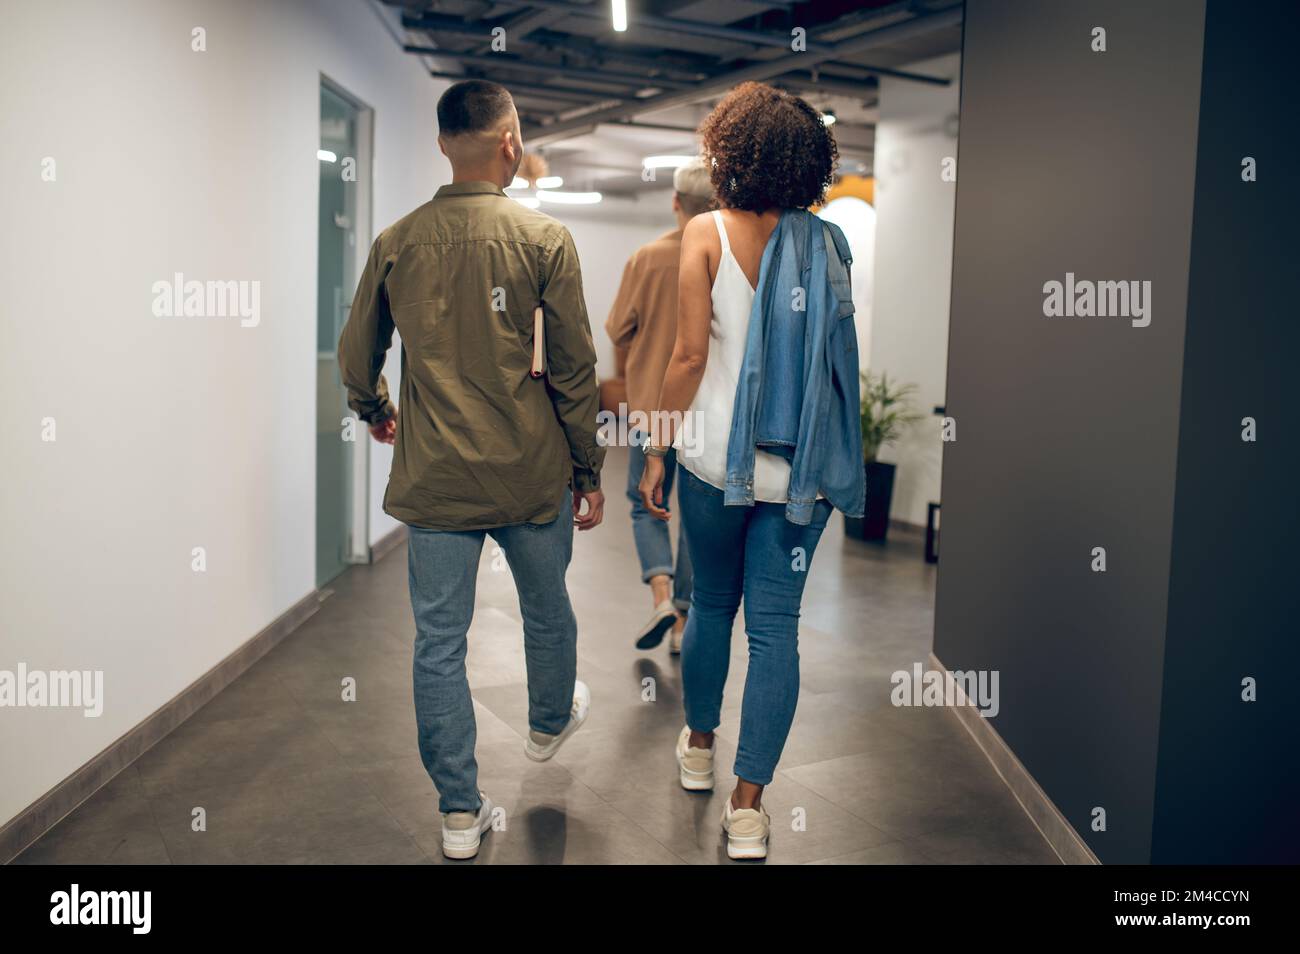 Group of three company employees in a well-lit hallway Stock Photo